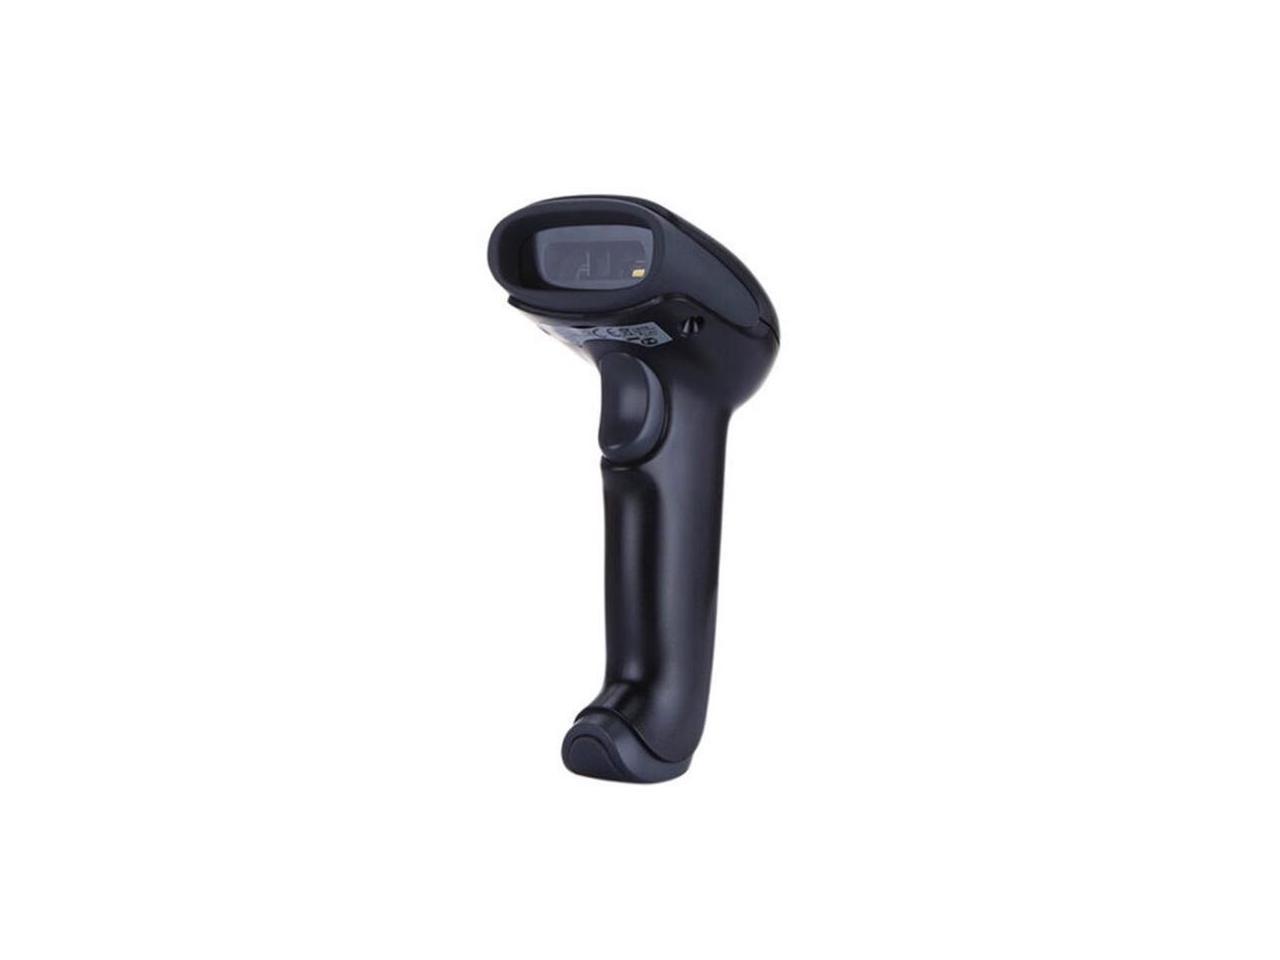 Honeywell Yj4600 2d Hand Held Bar Code Scanner With Usb Cable Black 4131